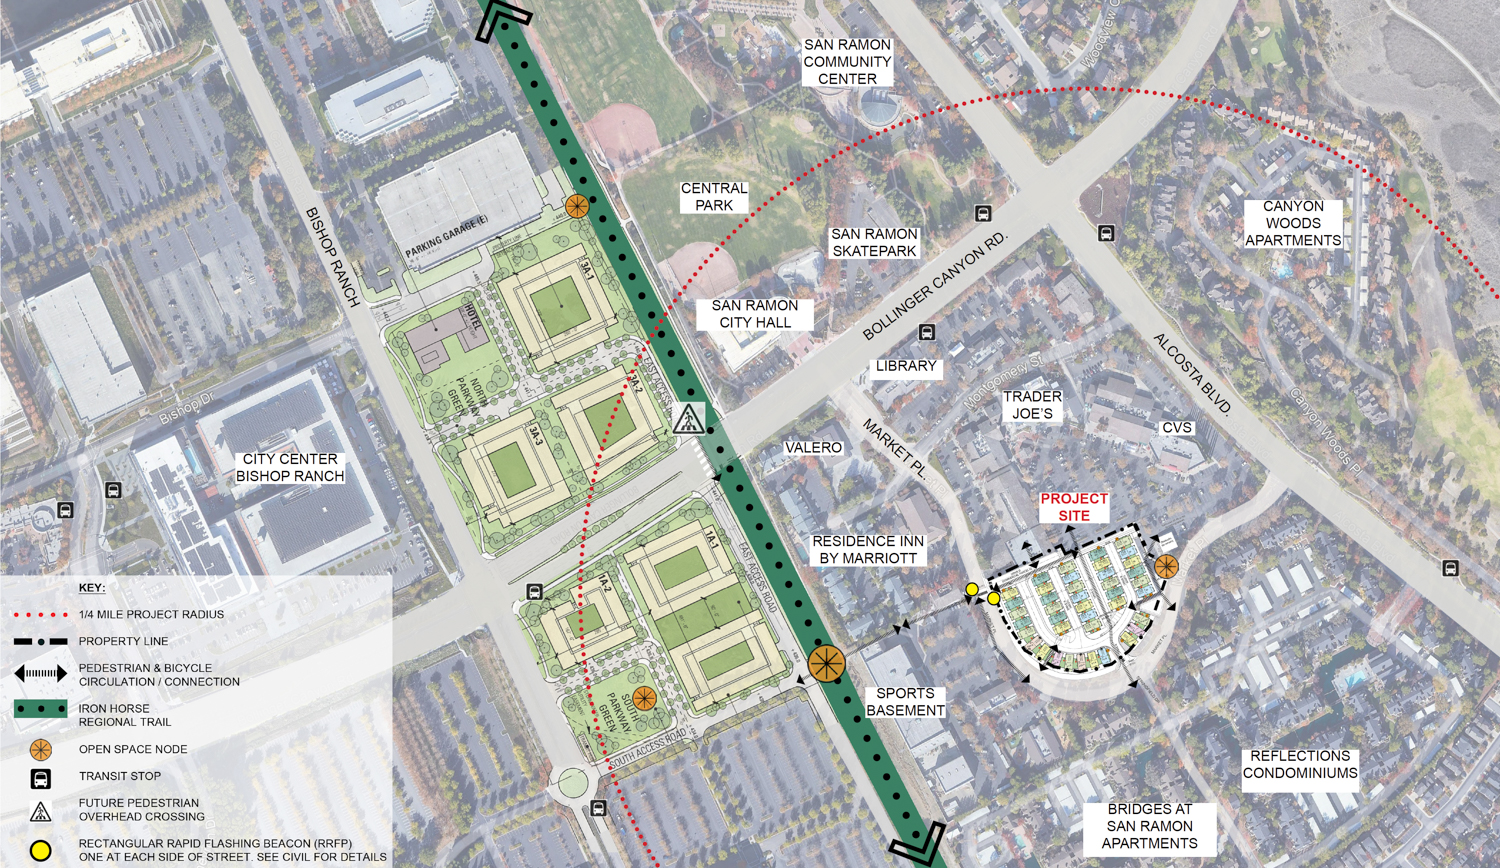 130 Market Place site map and area context, illustration by KTGY Architects